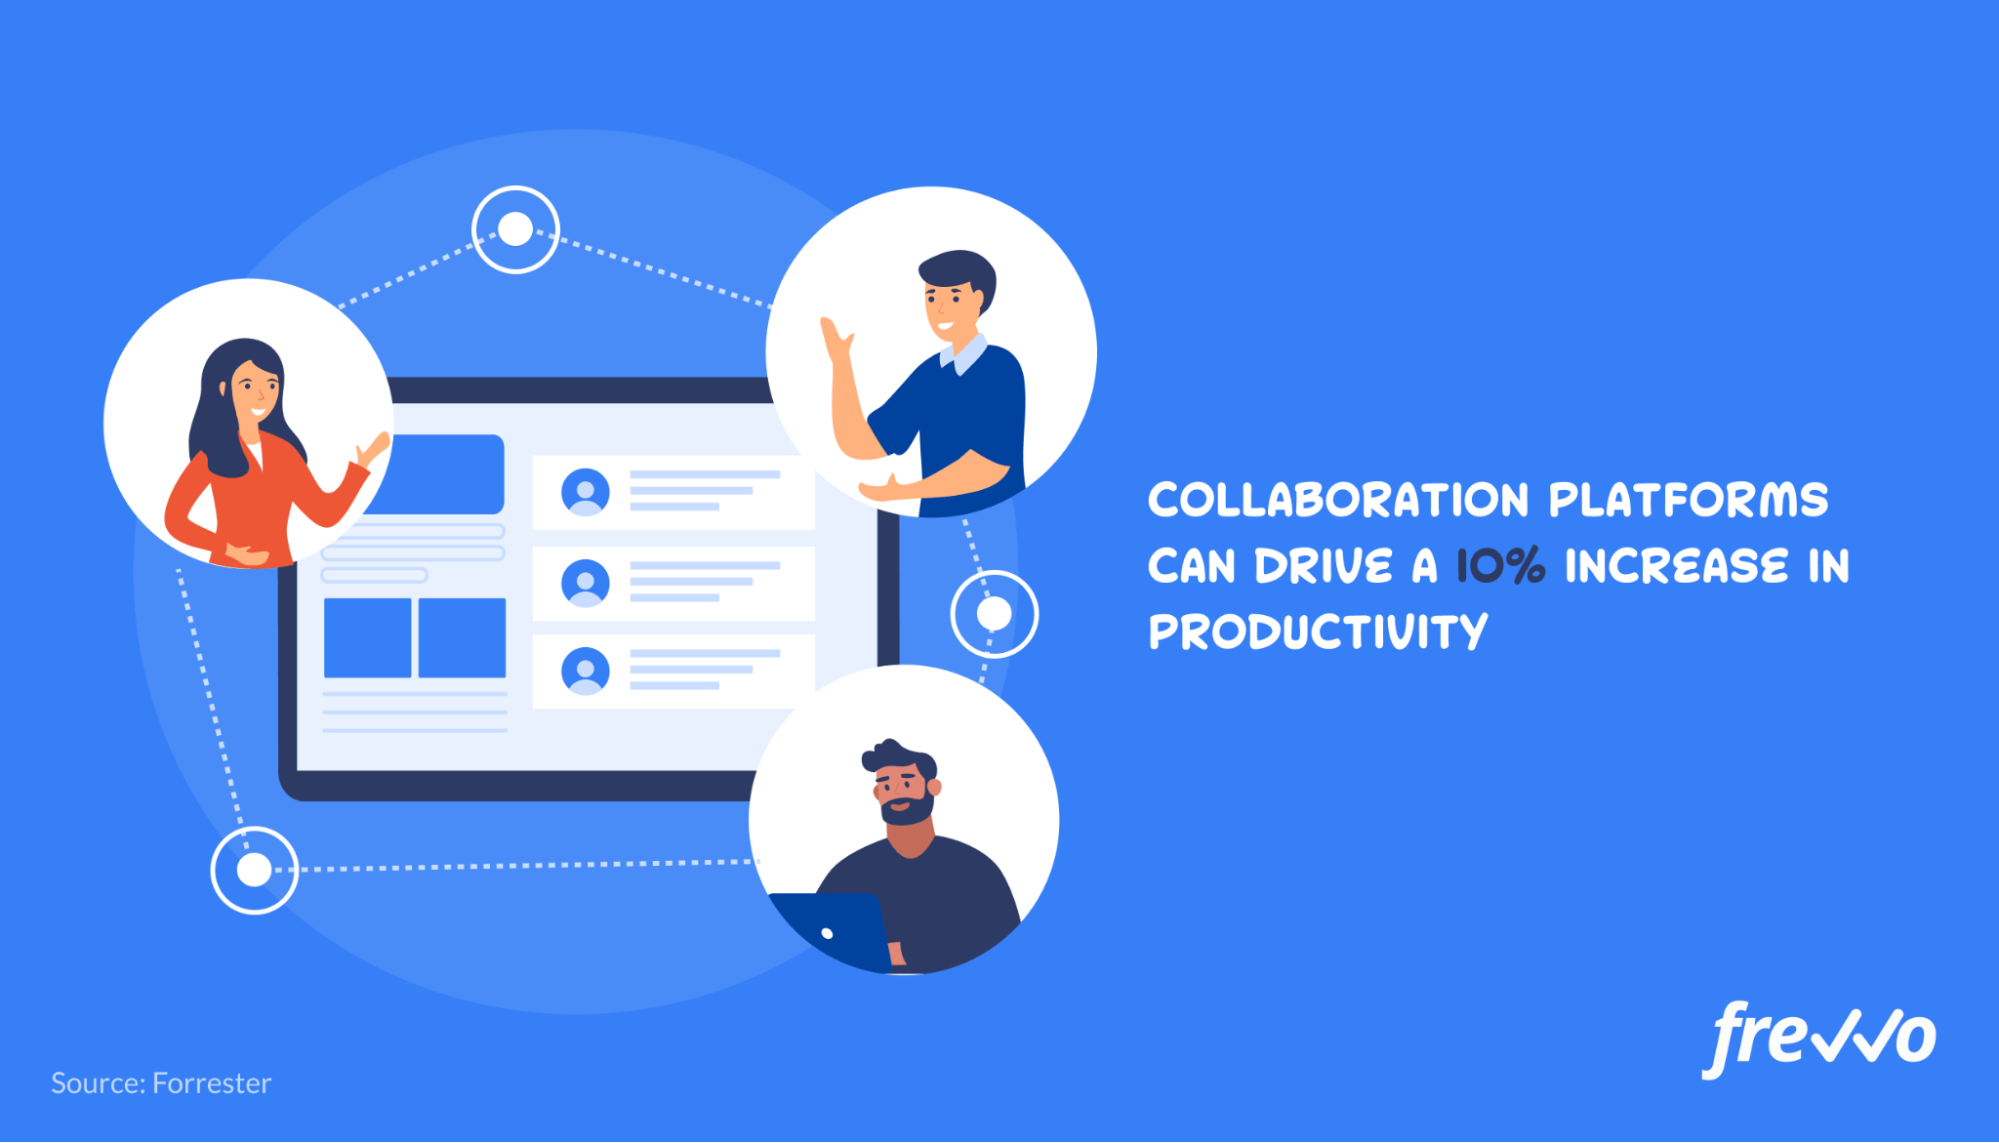 Collaboration platforms can increase productivity